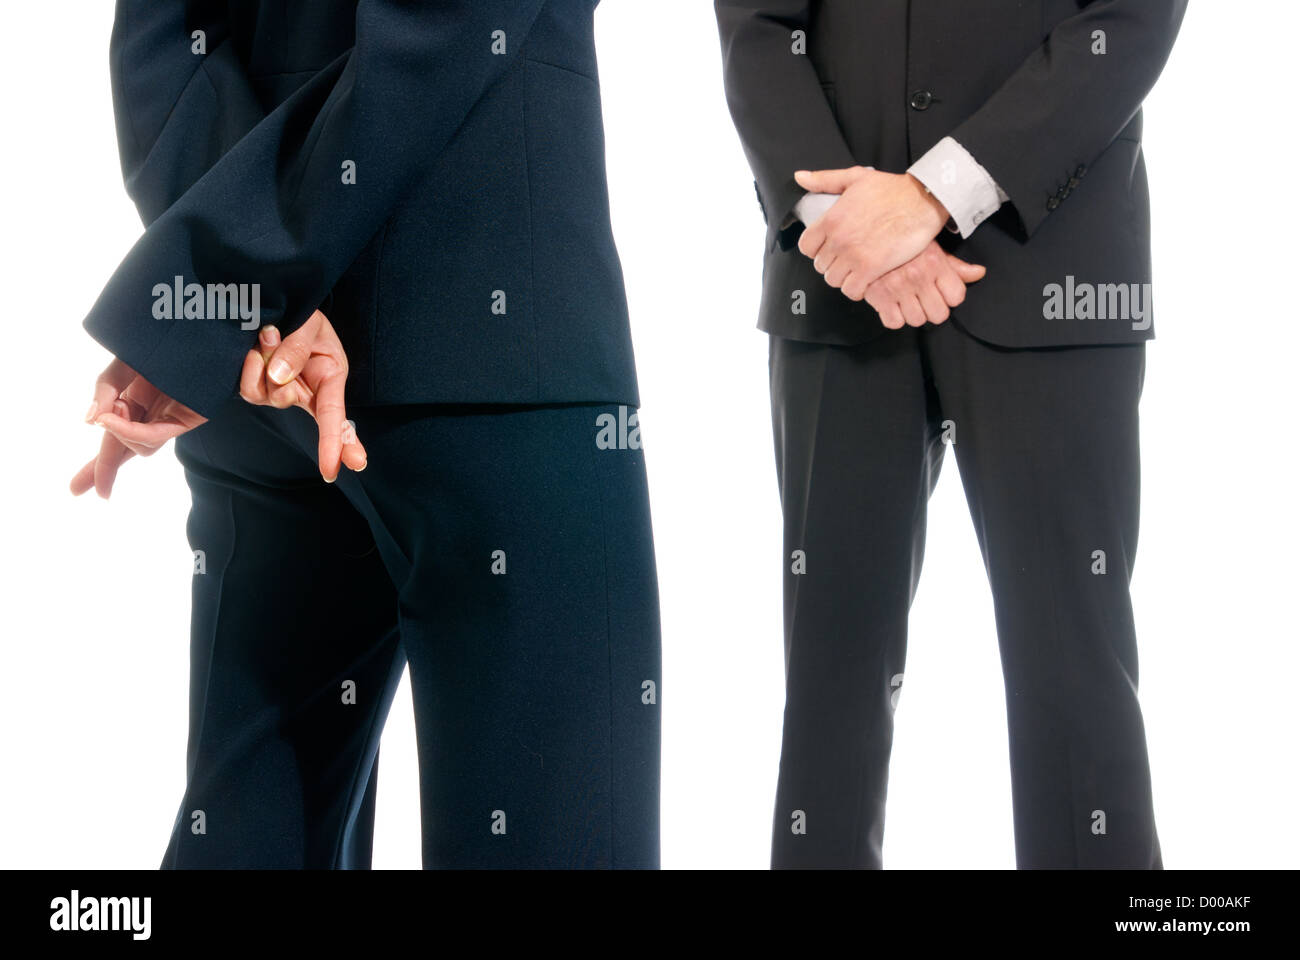 Business concept fingers crossed in front of boss isolated on white background Stock Photo